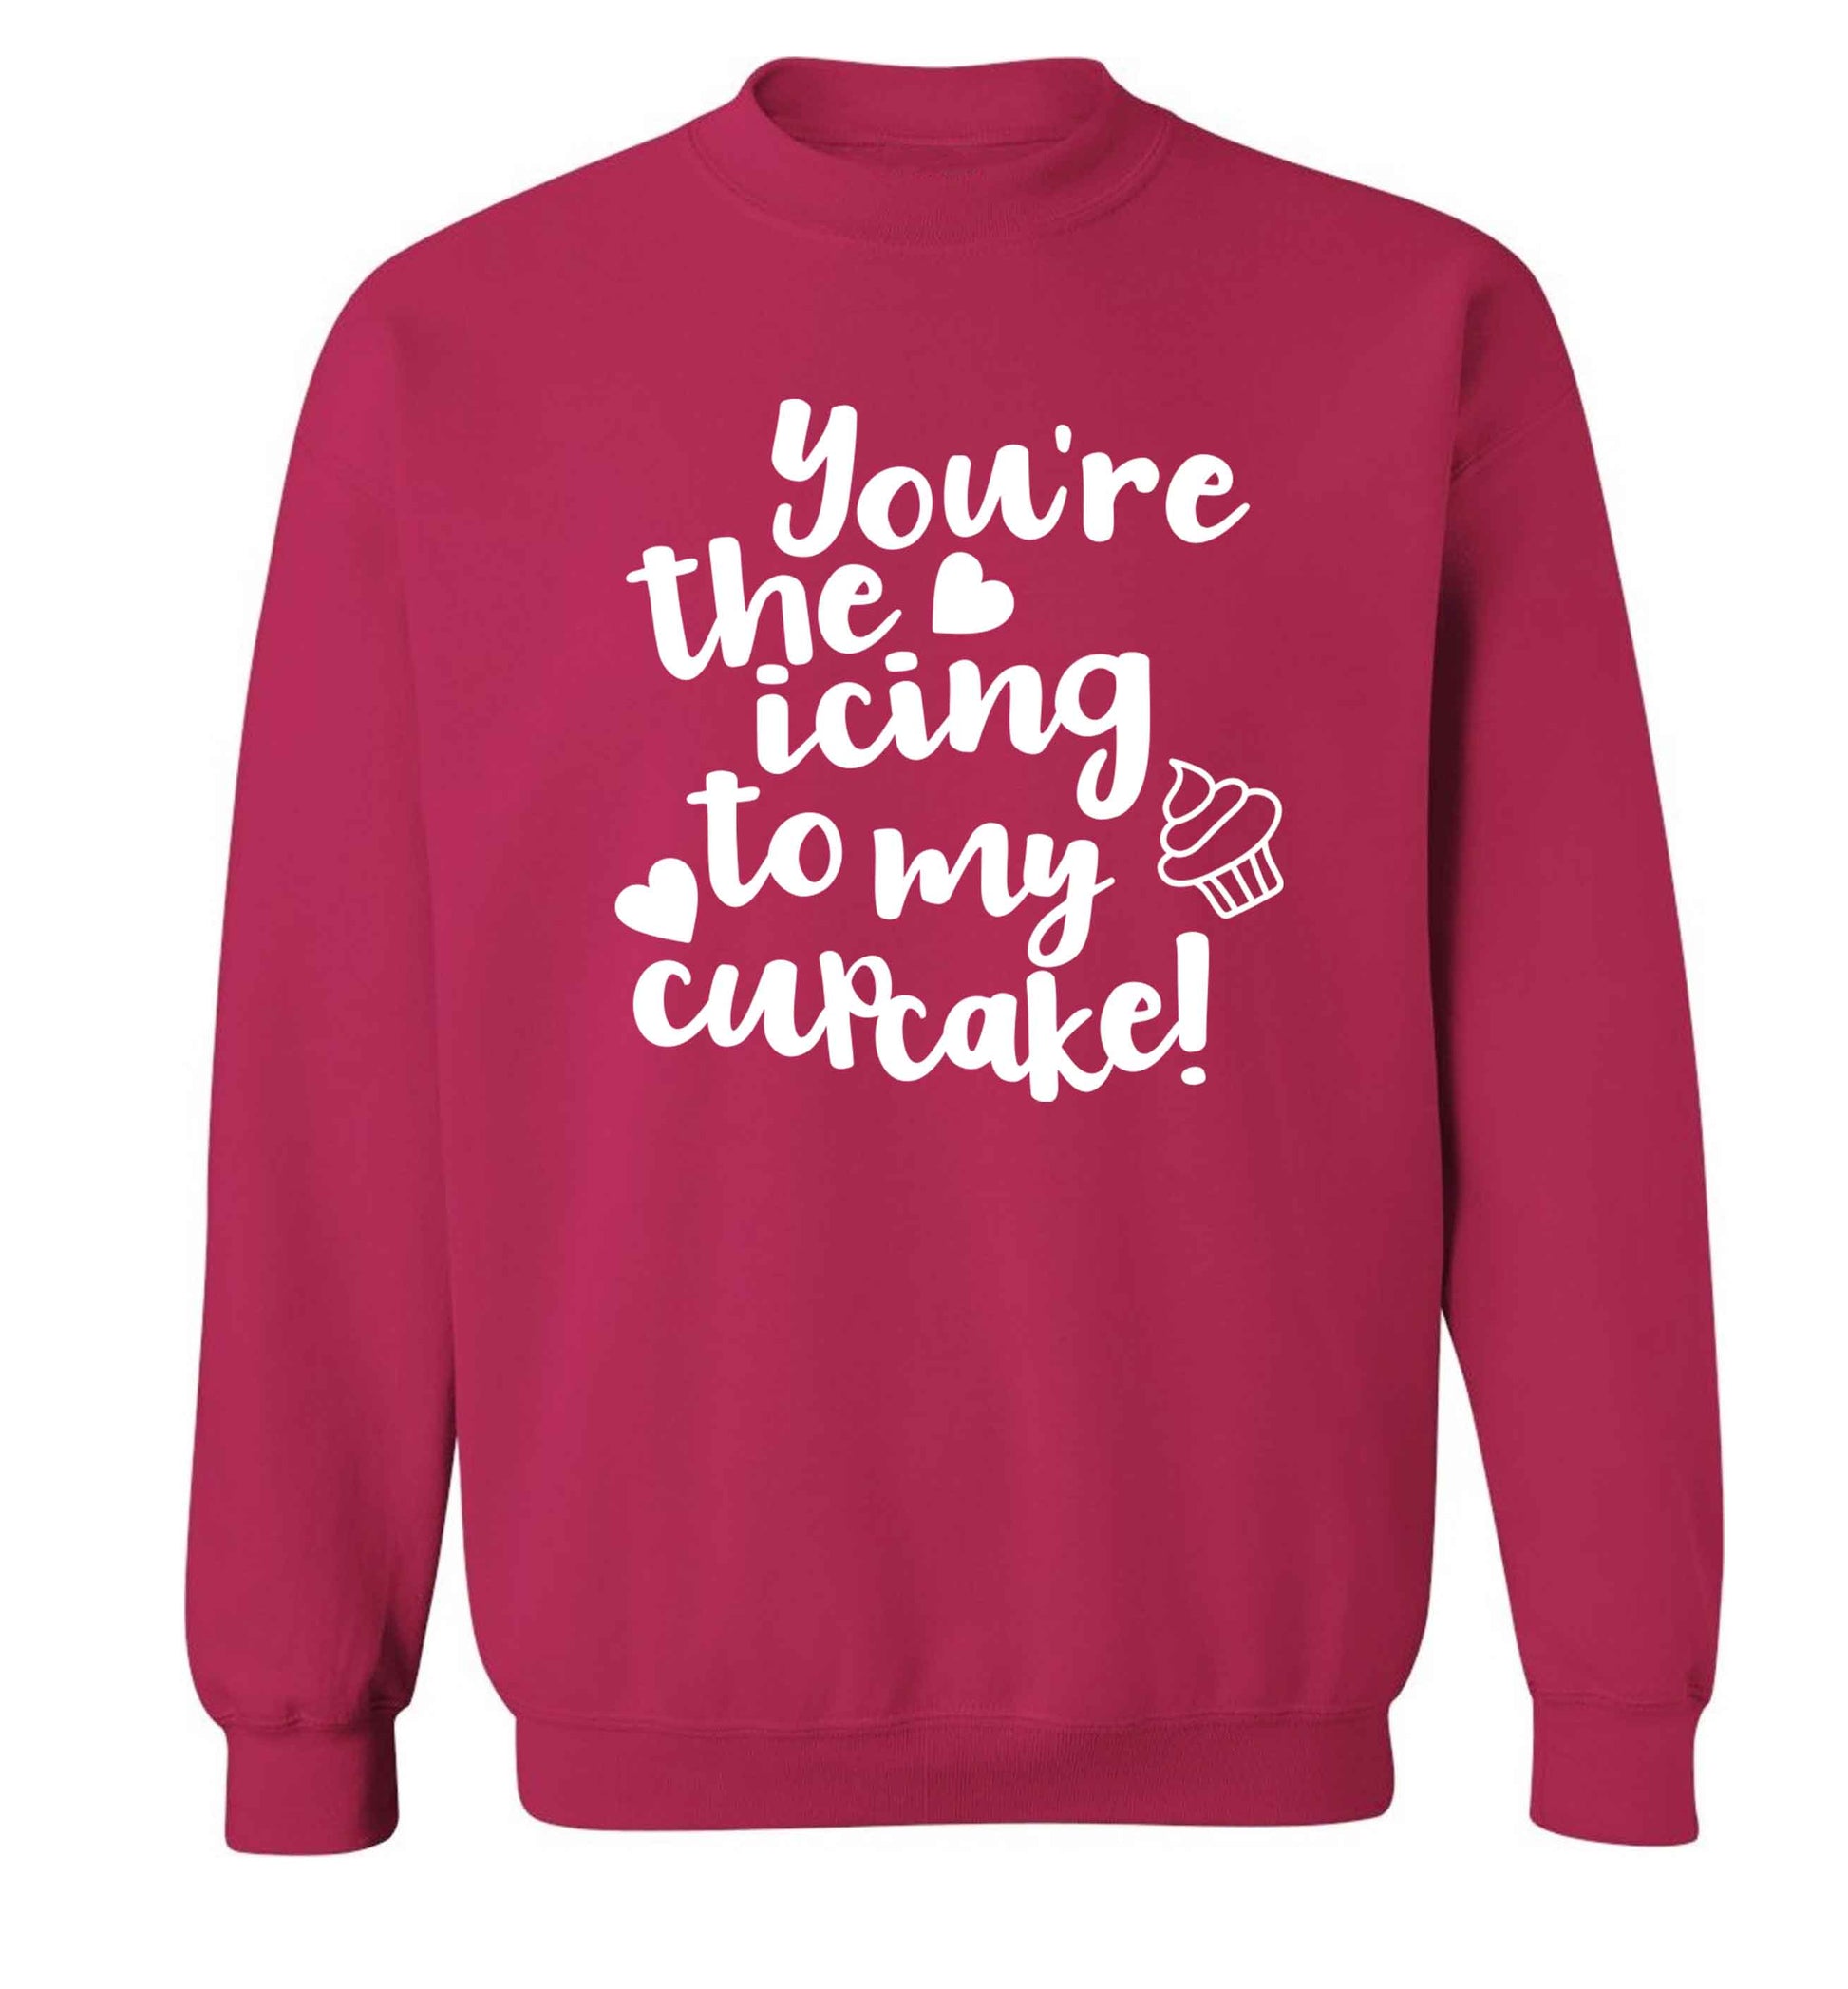 You're the icing to my cupcake Adult's unisex pink Sweater 2XL